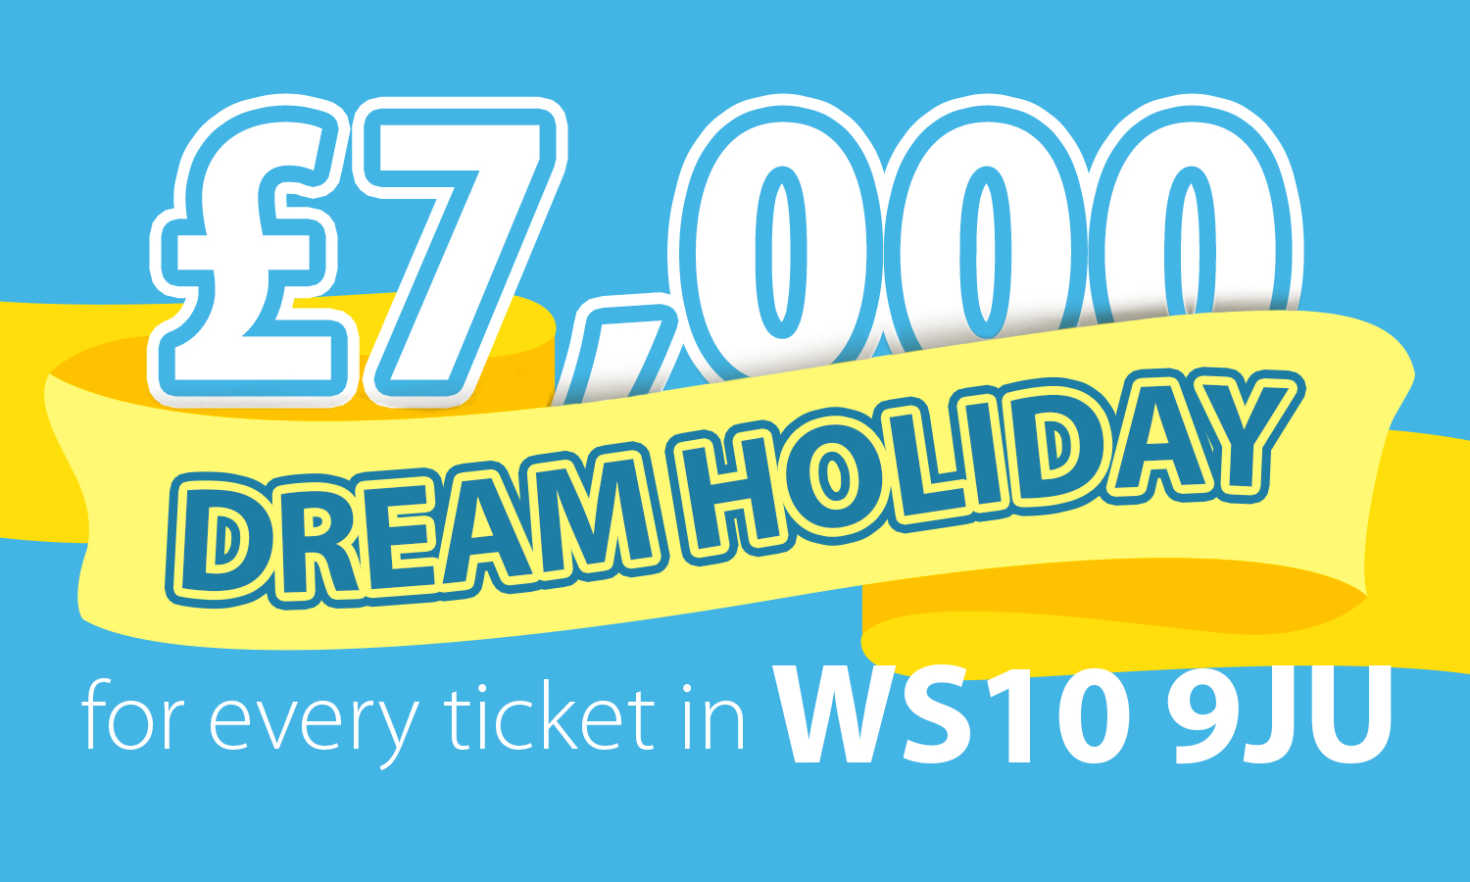 One lucky Wednesbury player has scooped the first £7,000 Dream Holiday prize of the year